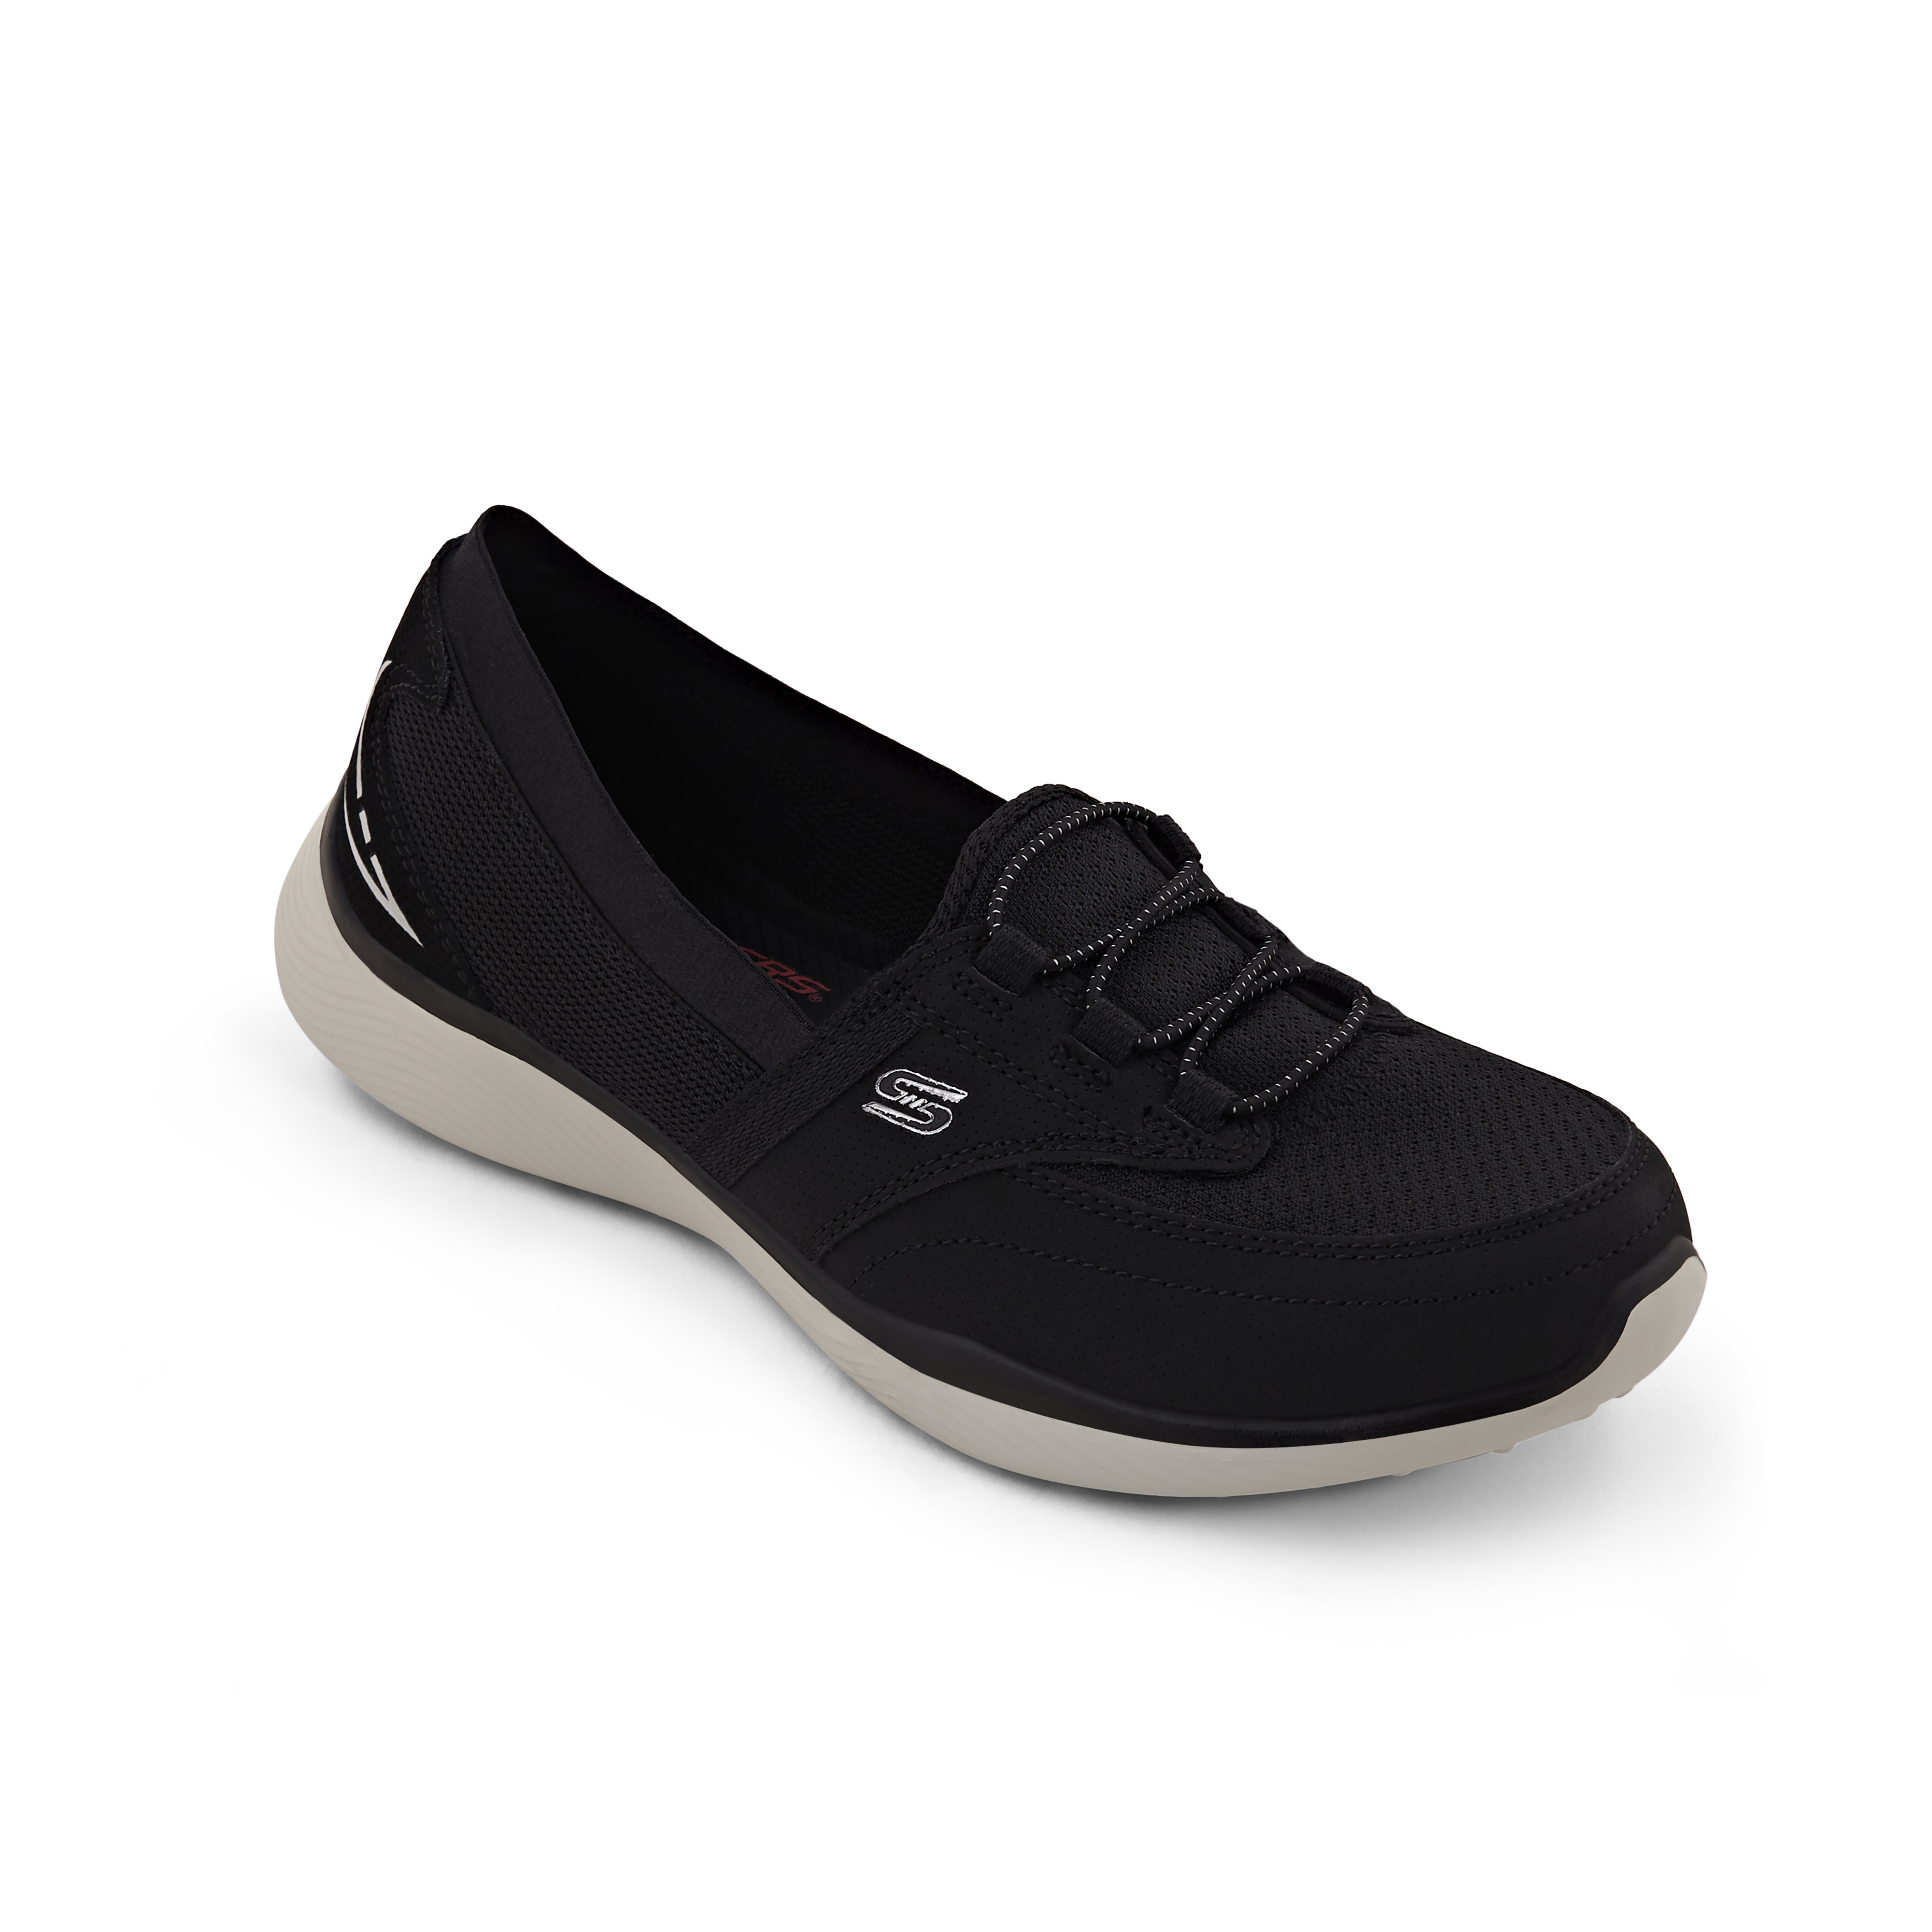 MICROBURST 2.0 - SAVVY POISE, BLACK/WHITE Footwear Lateral View